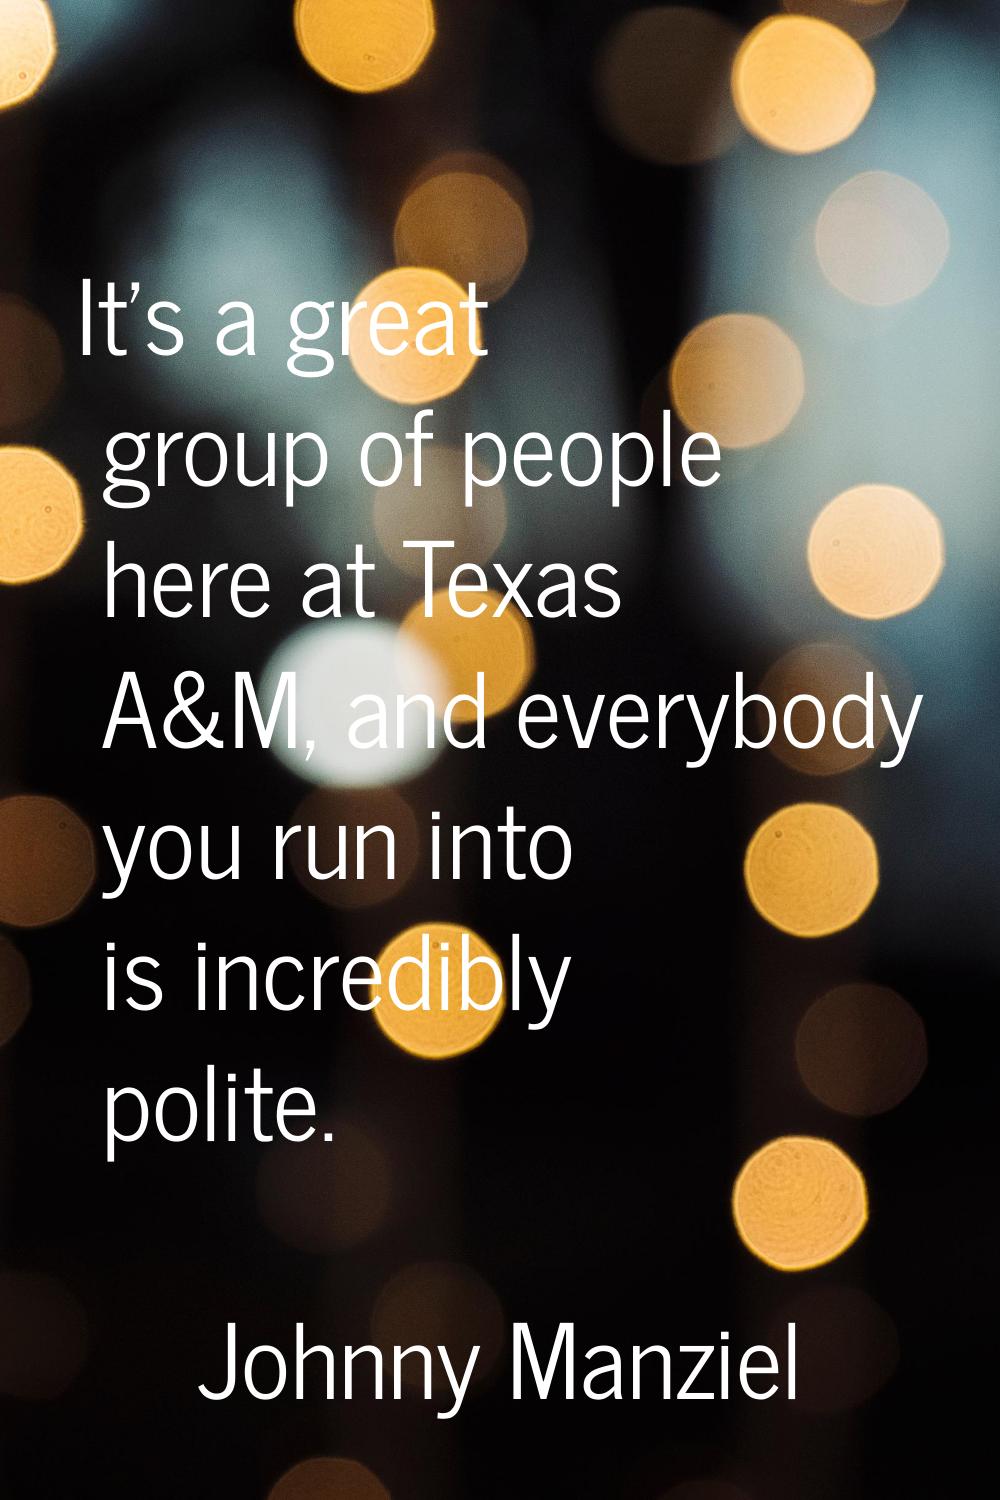 It's a great group of people here at Texas A&M, and everybody you run into is incredibly polite.